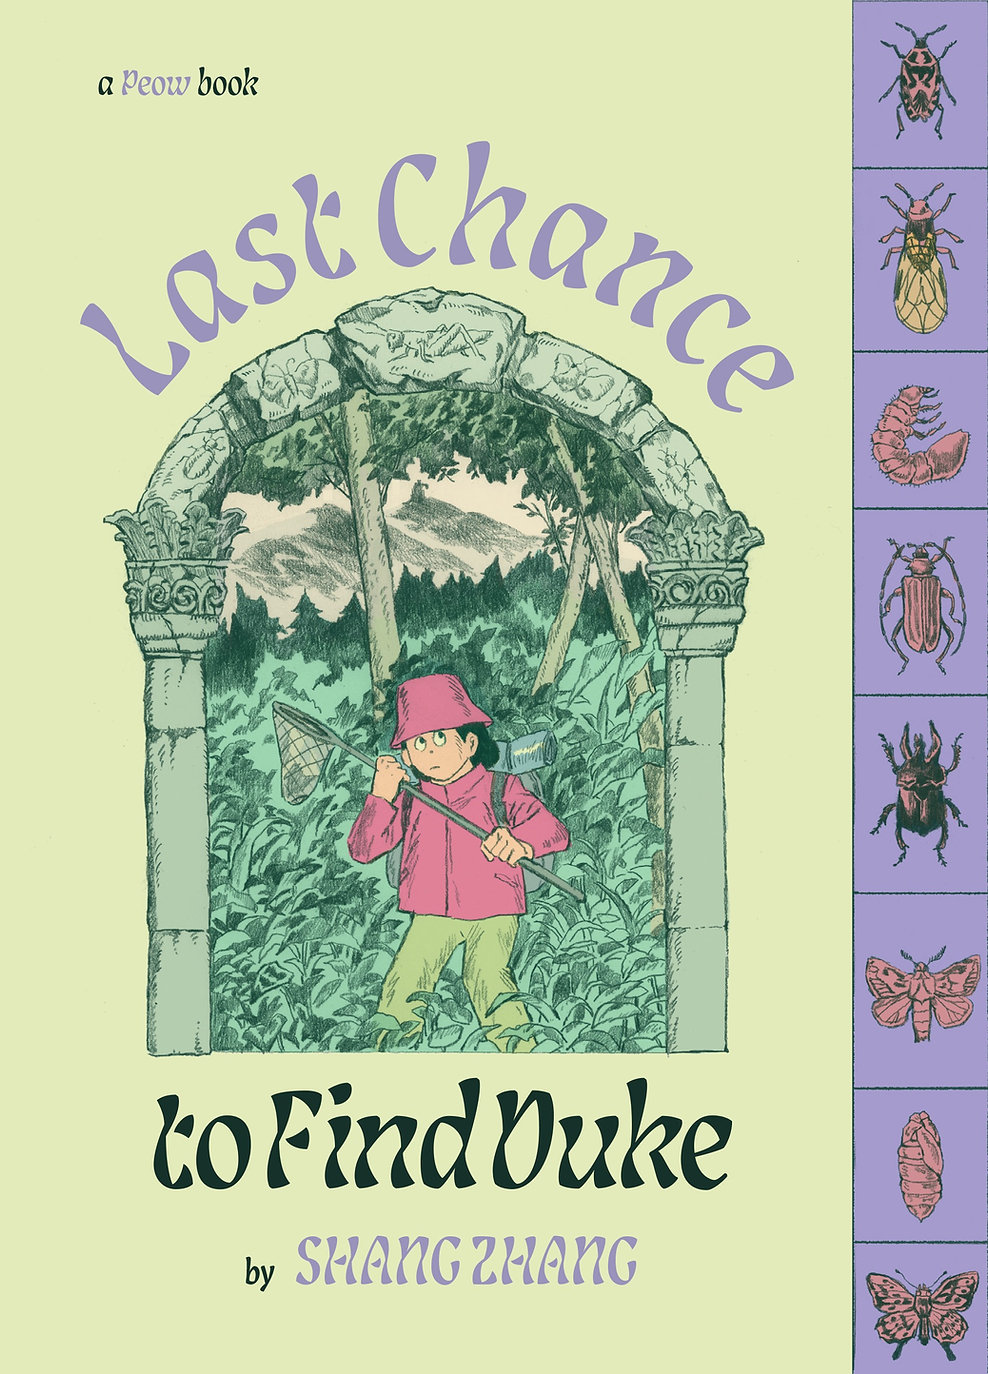 Last Chance To Find Duke